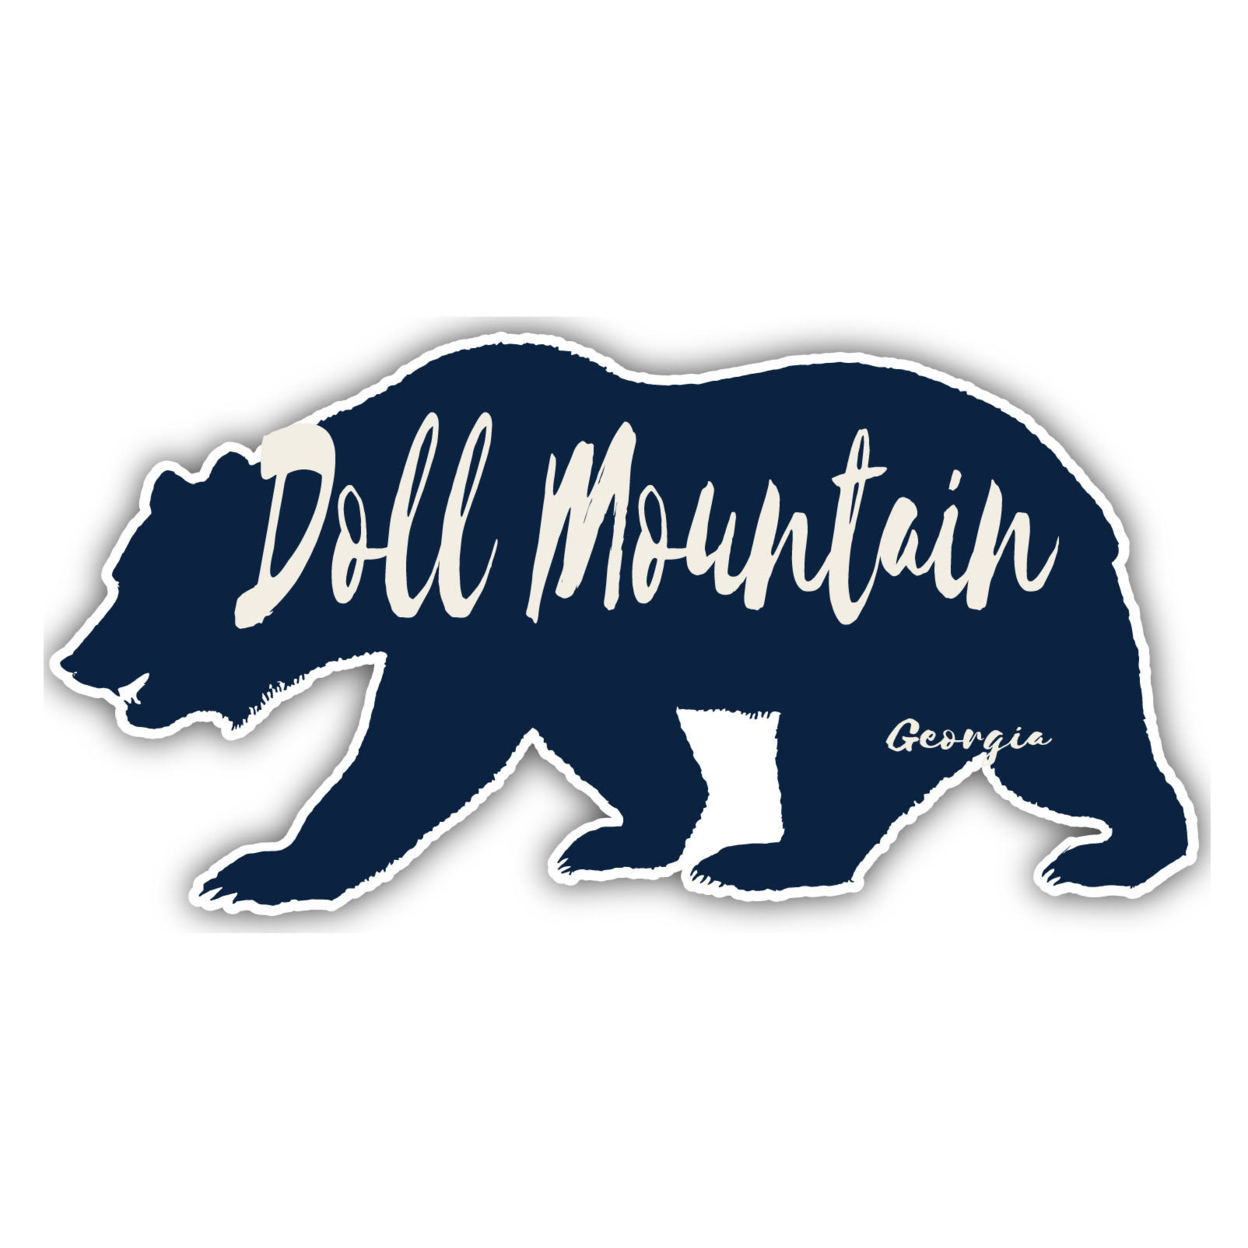 Doll Mountain Georgia Souvenir Decorative Stickers (Choose Theme And Size) - 4-Pack, 4-Inch, Great Outdoors